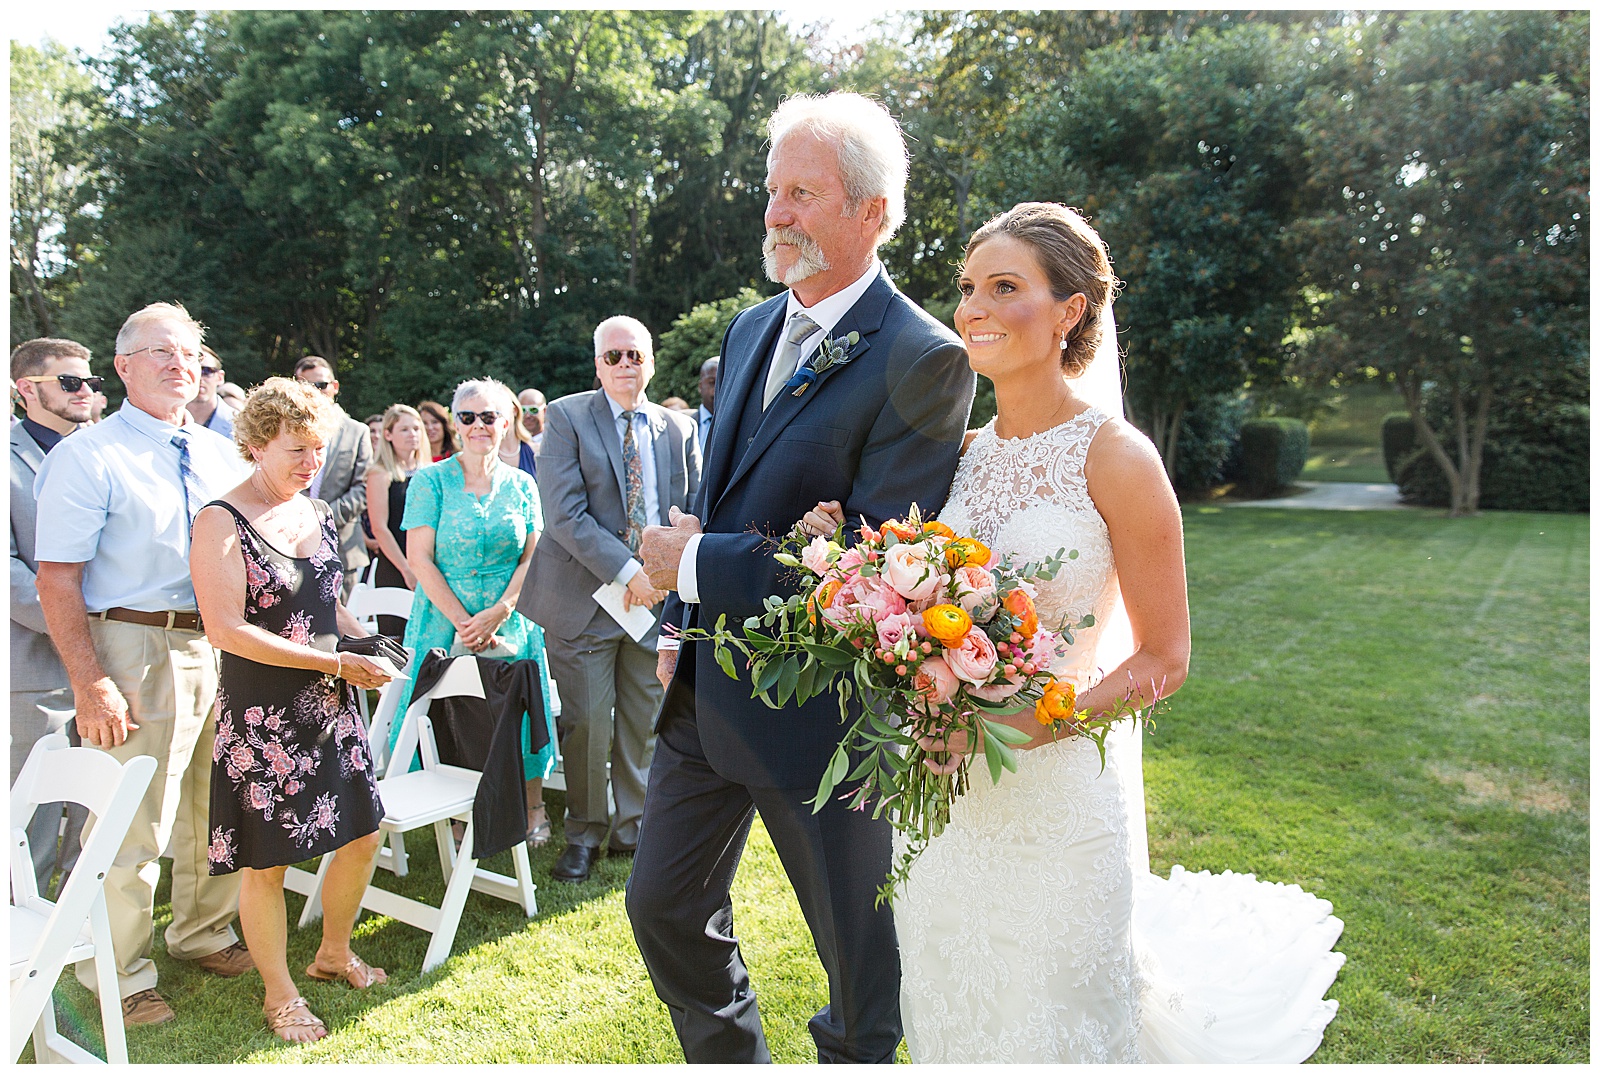 FOB walks his daughter down the aisle at Glen Manor